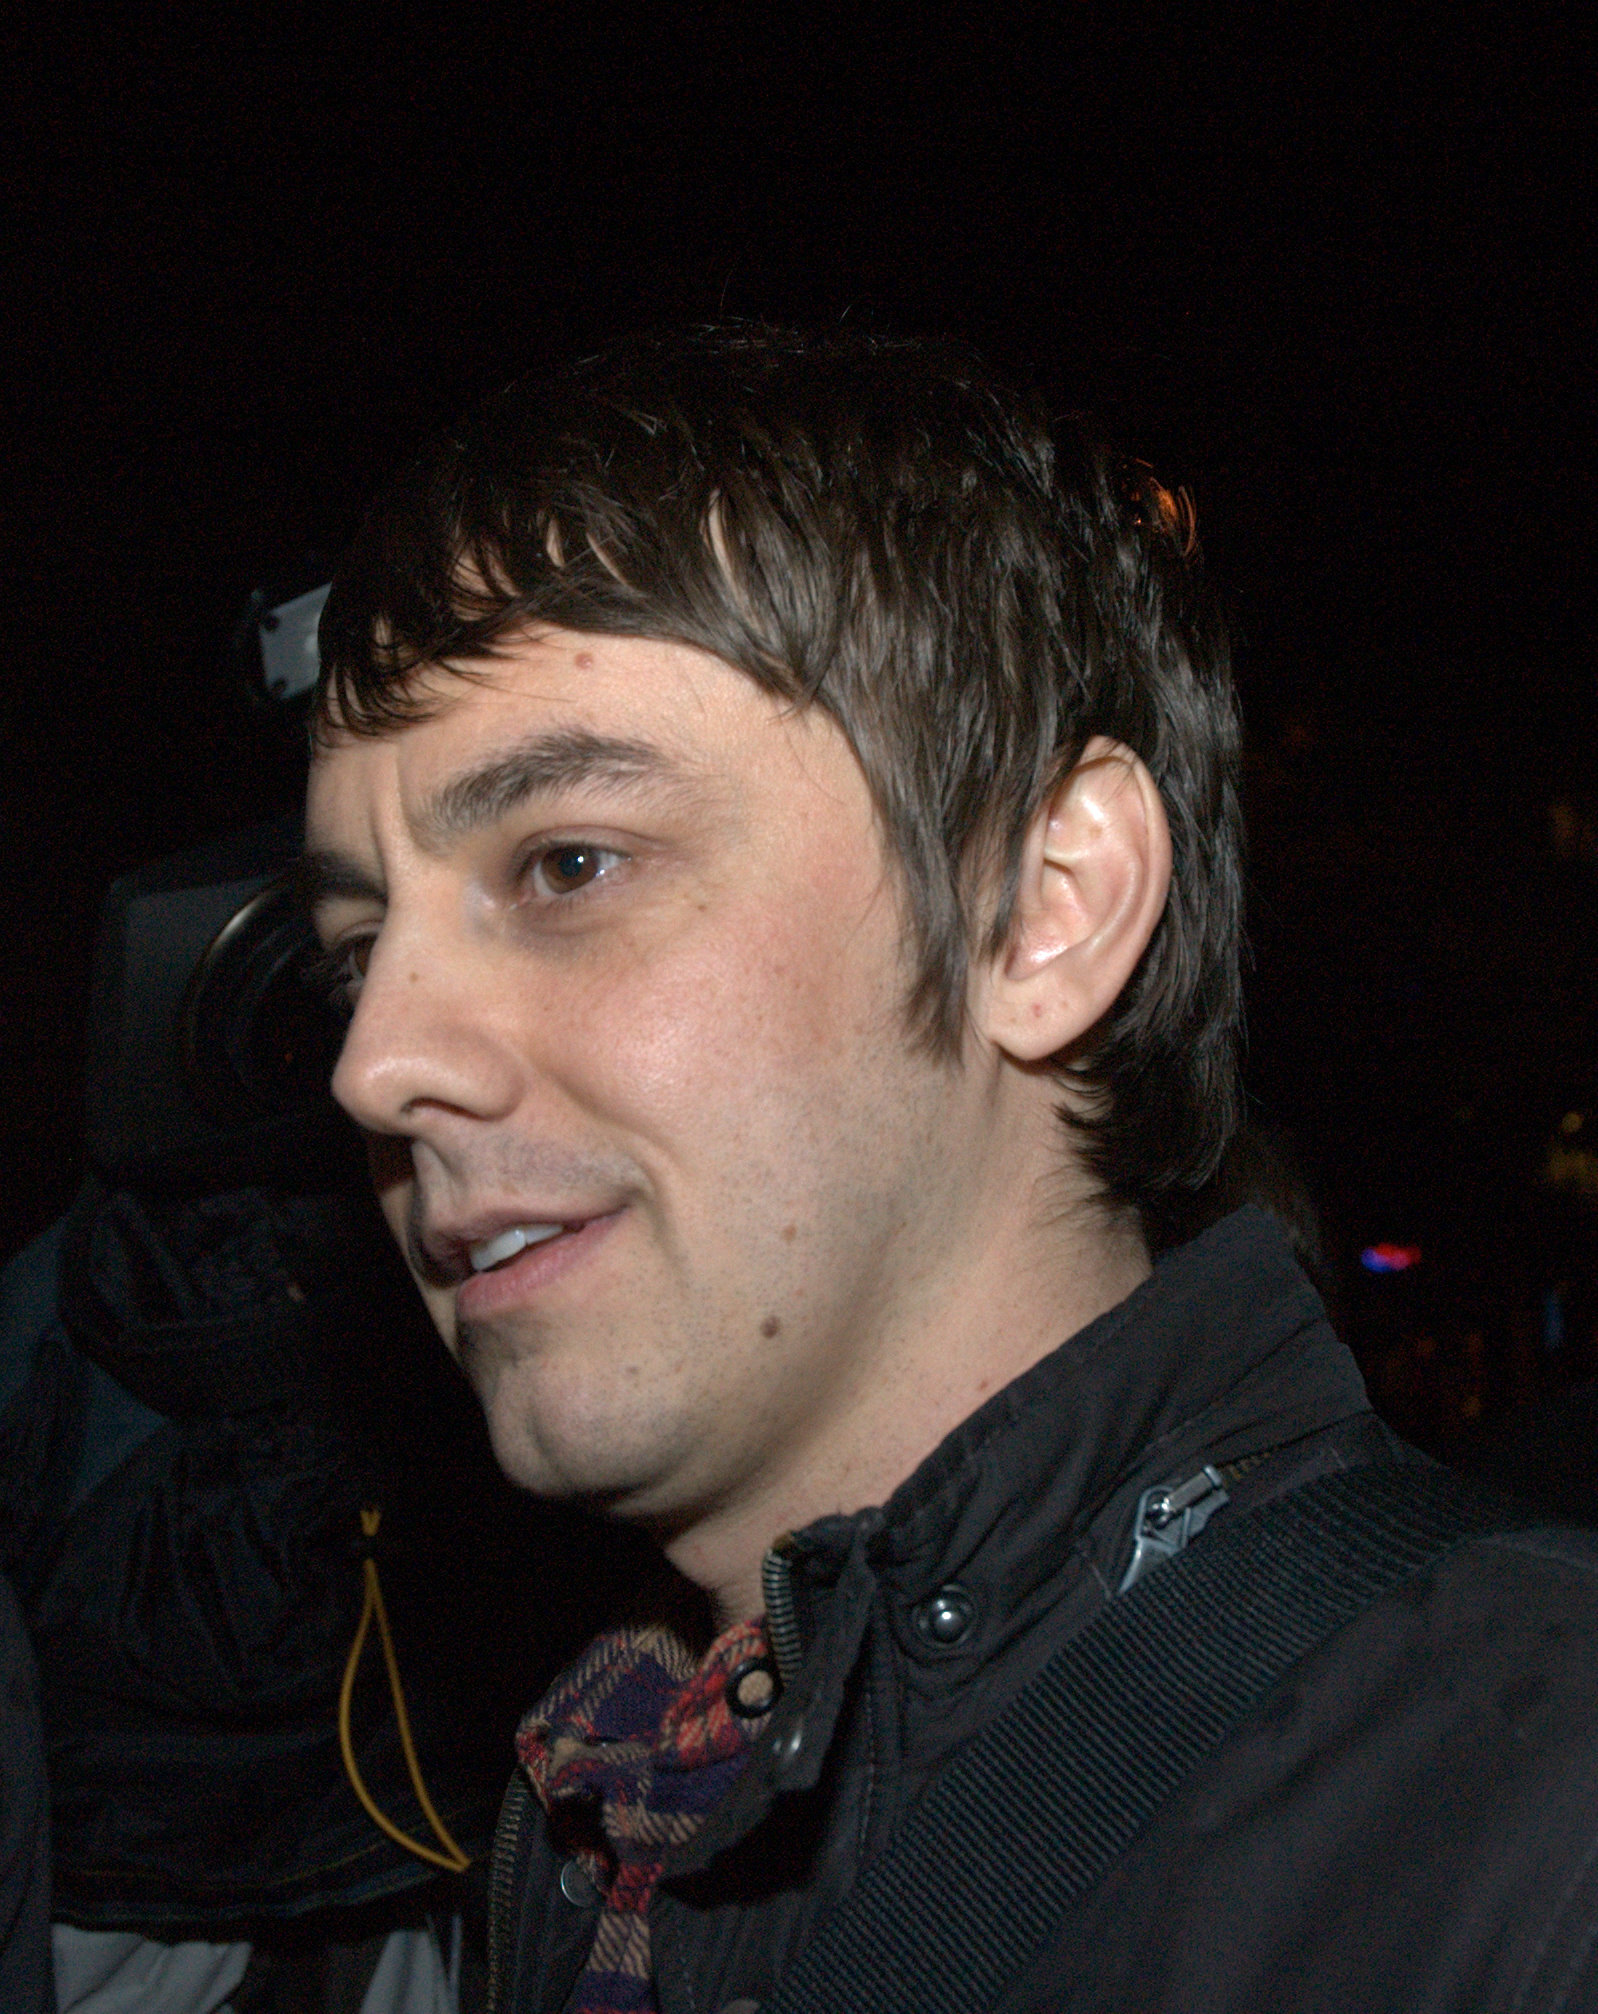 Jorma Taccone at event of MacGruber (2010)